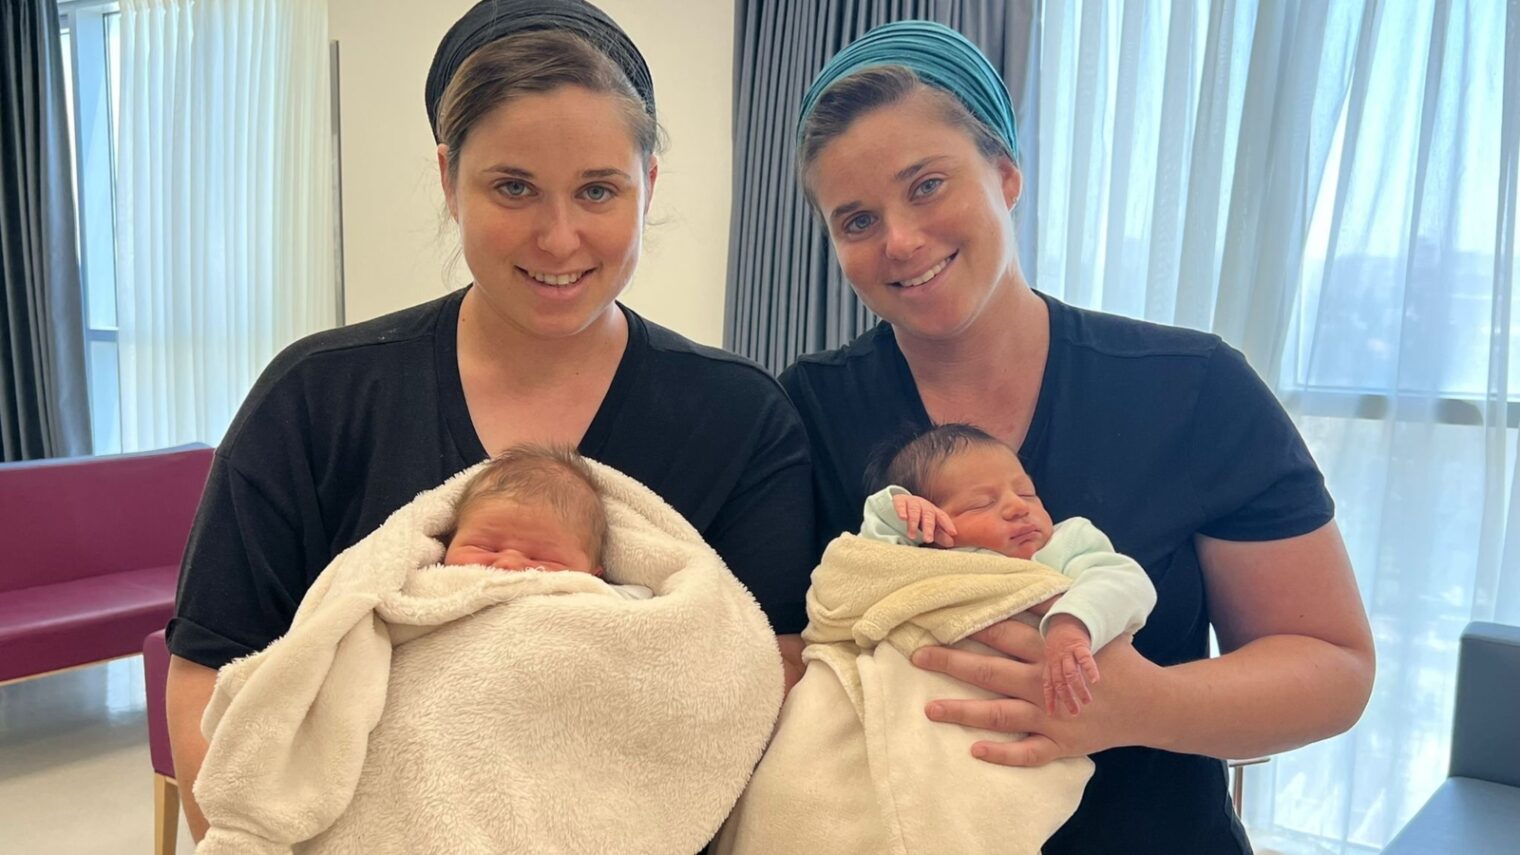 Identical twins Yael Yishai and Avital Segel delivered boys within hours of one another at Shaare Zedek Medical Center in Jerusalem. Photo courtesy of SZMC